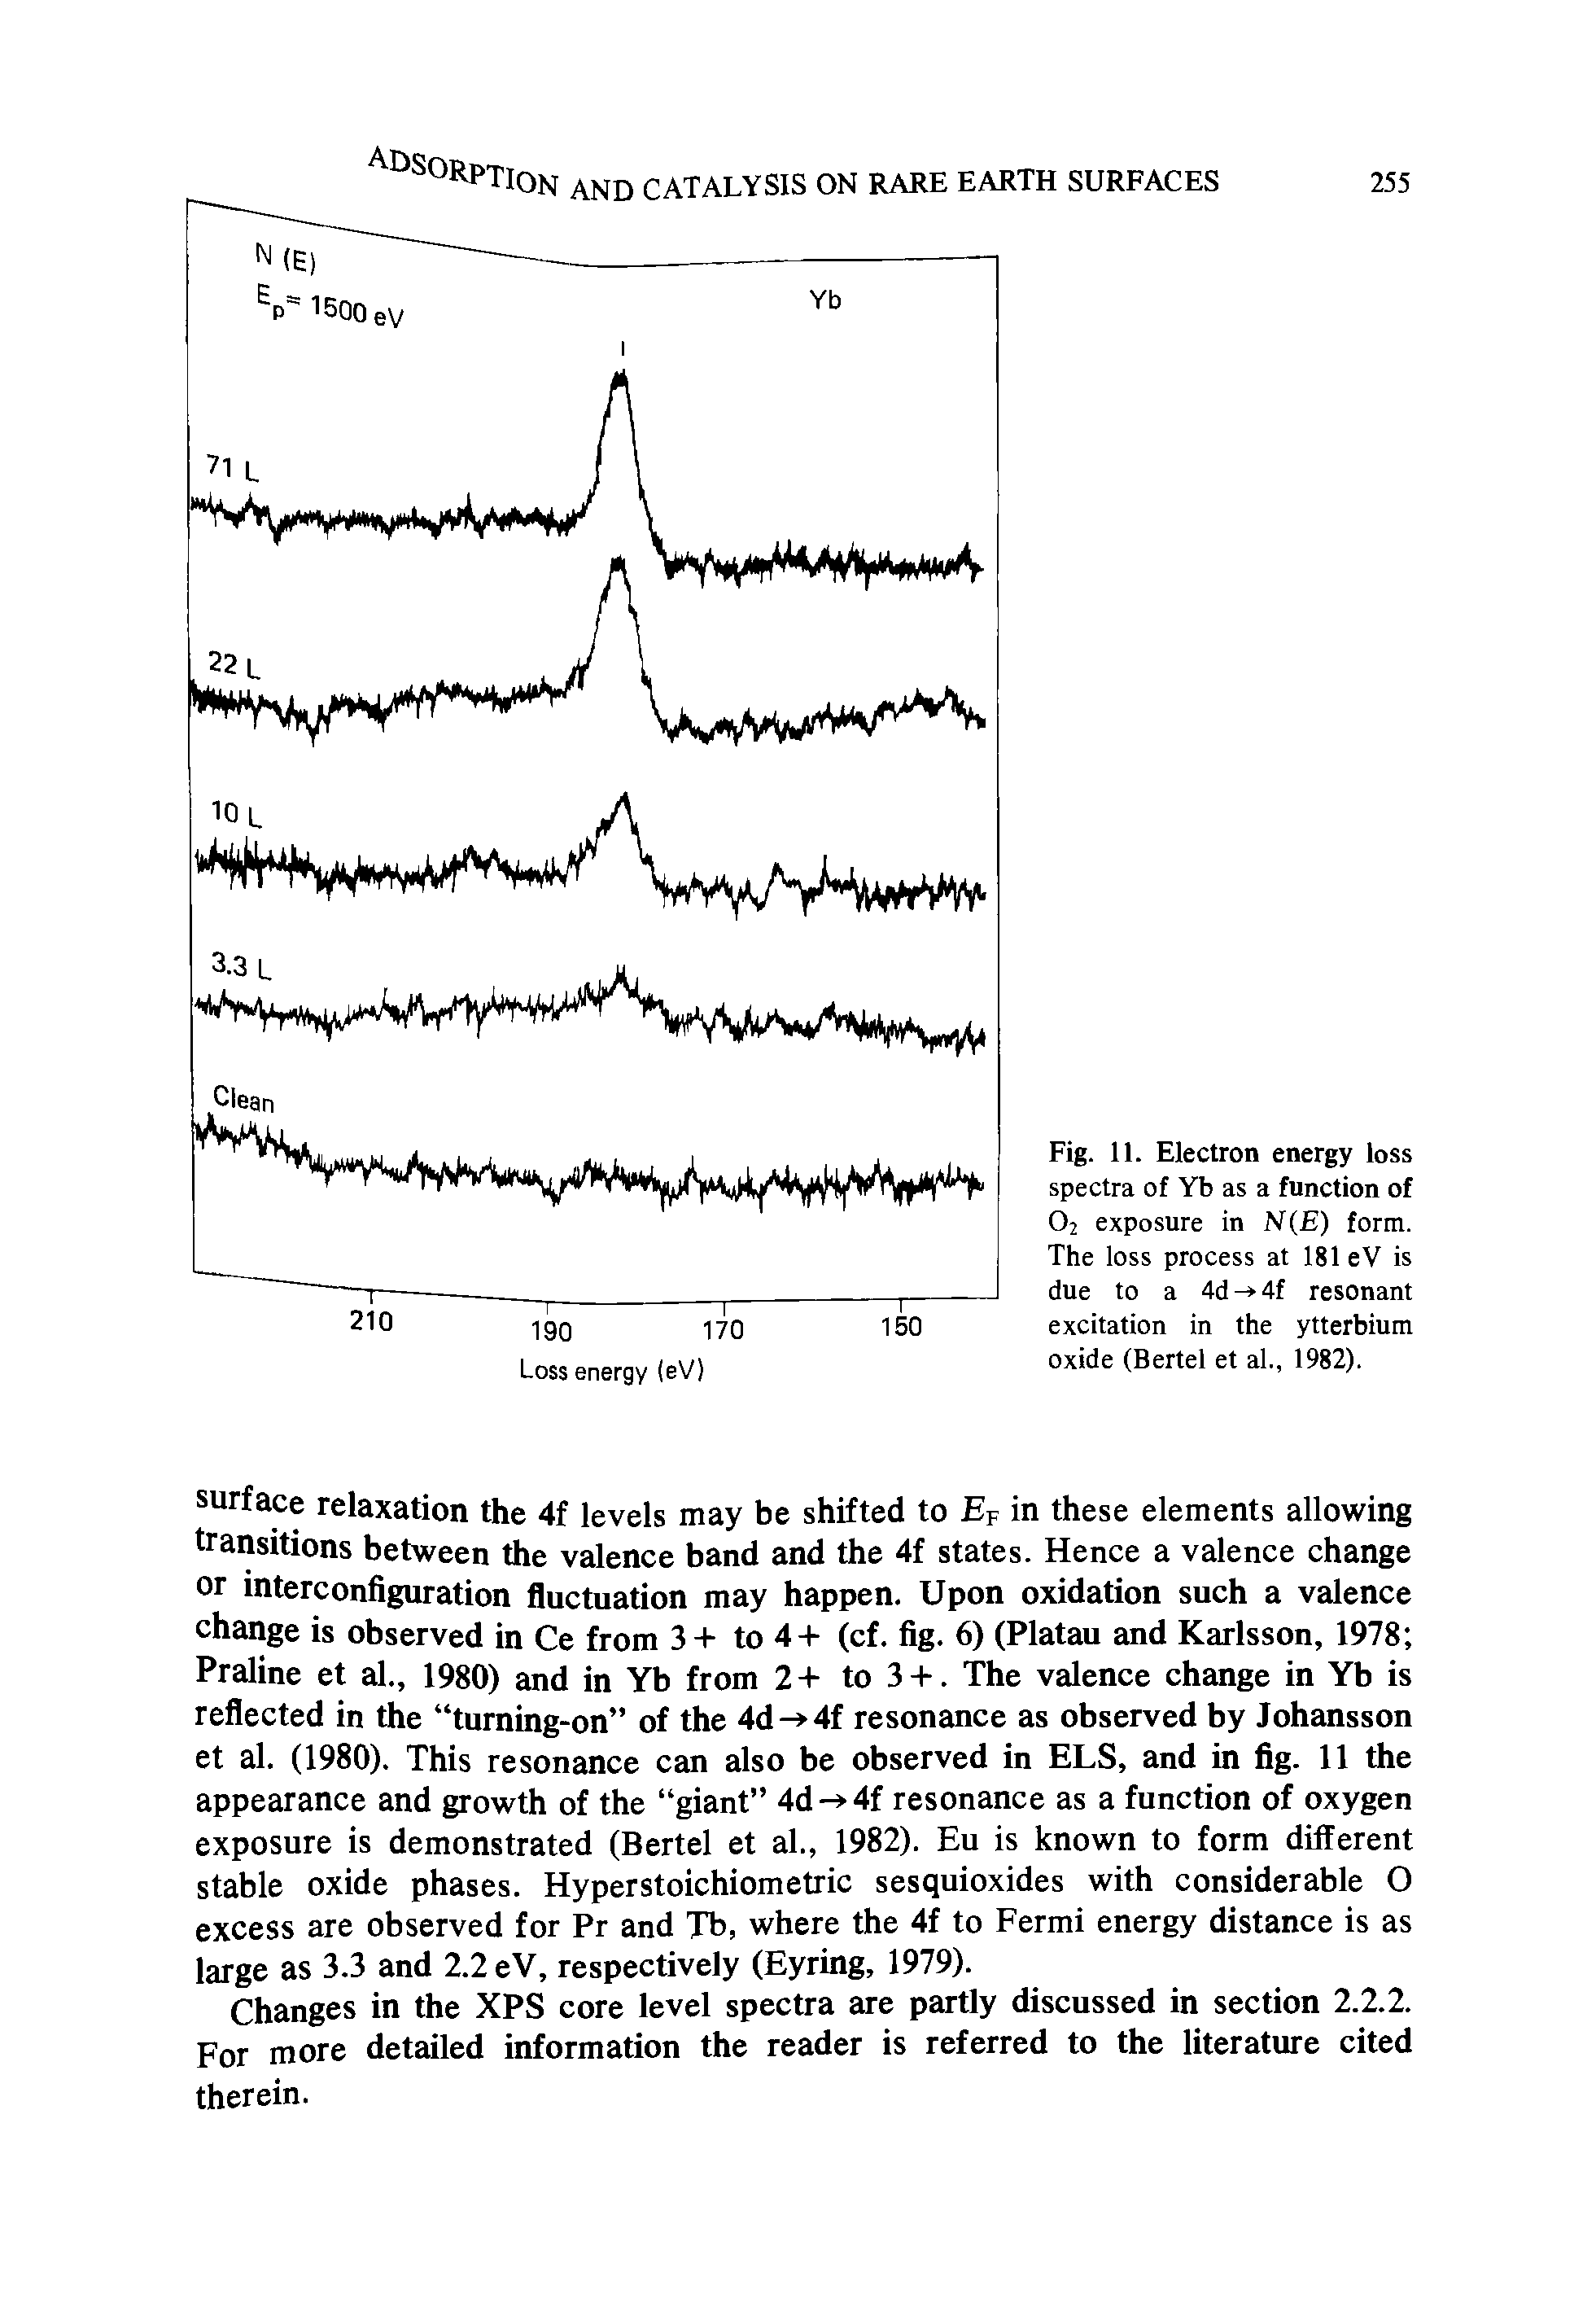 Fig. 11. Electron energy loss spectra of Yb as a function of O2 exposure in N(E) form. The loss process at 181 eV is due to a 4d- 4f resonant excitation in the ytterbium oxide (Bertel et al., 1982).